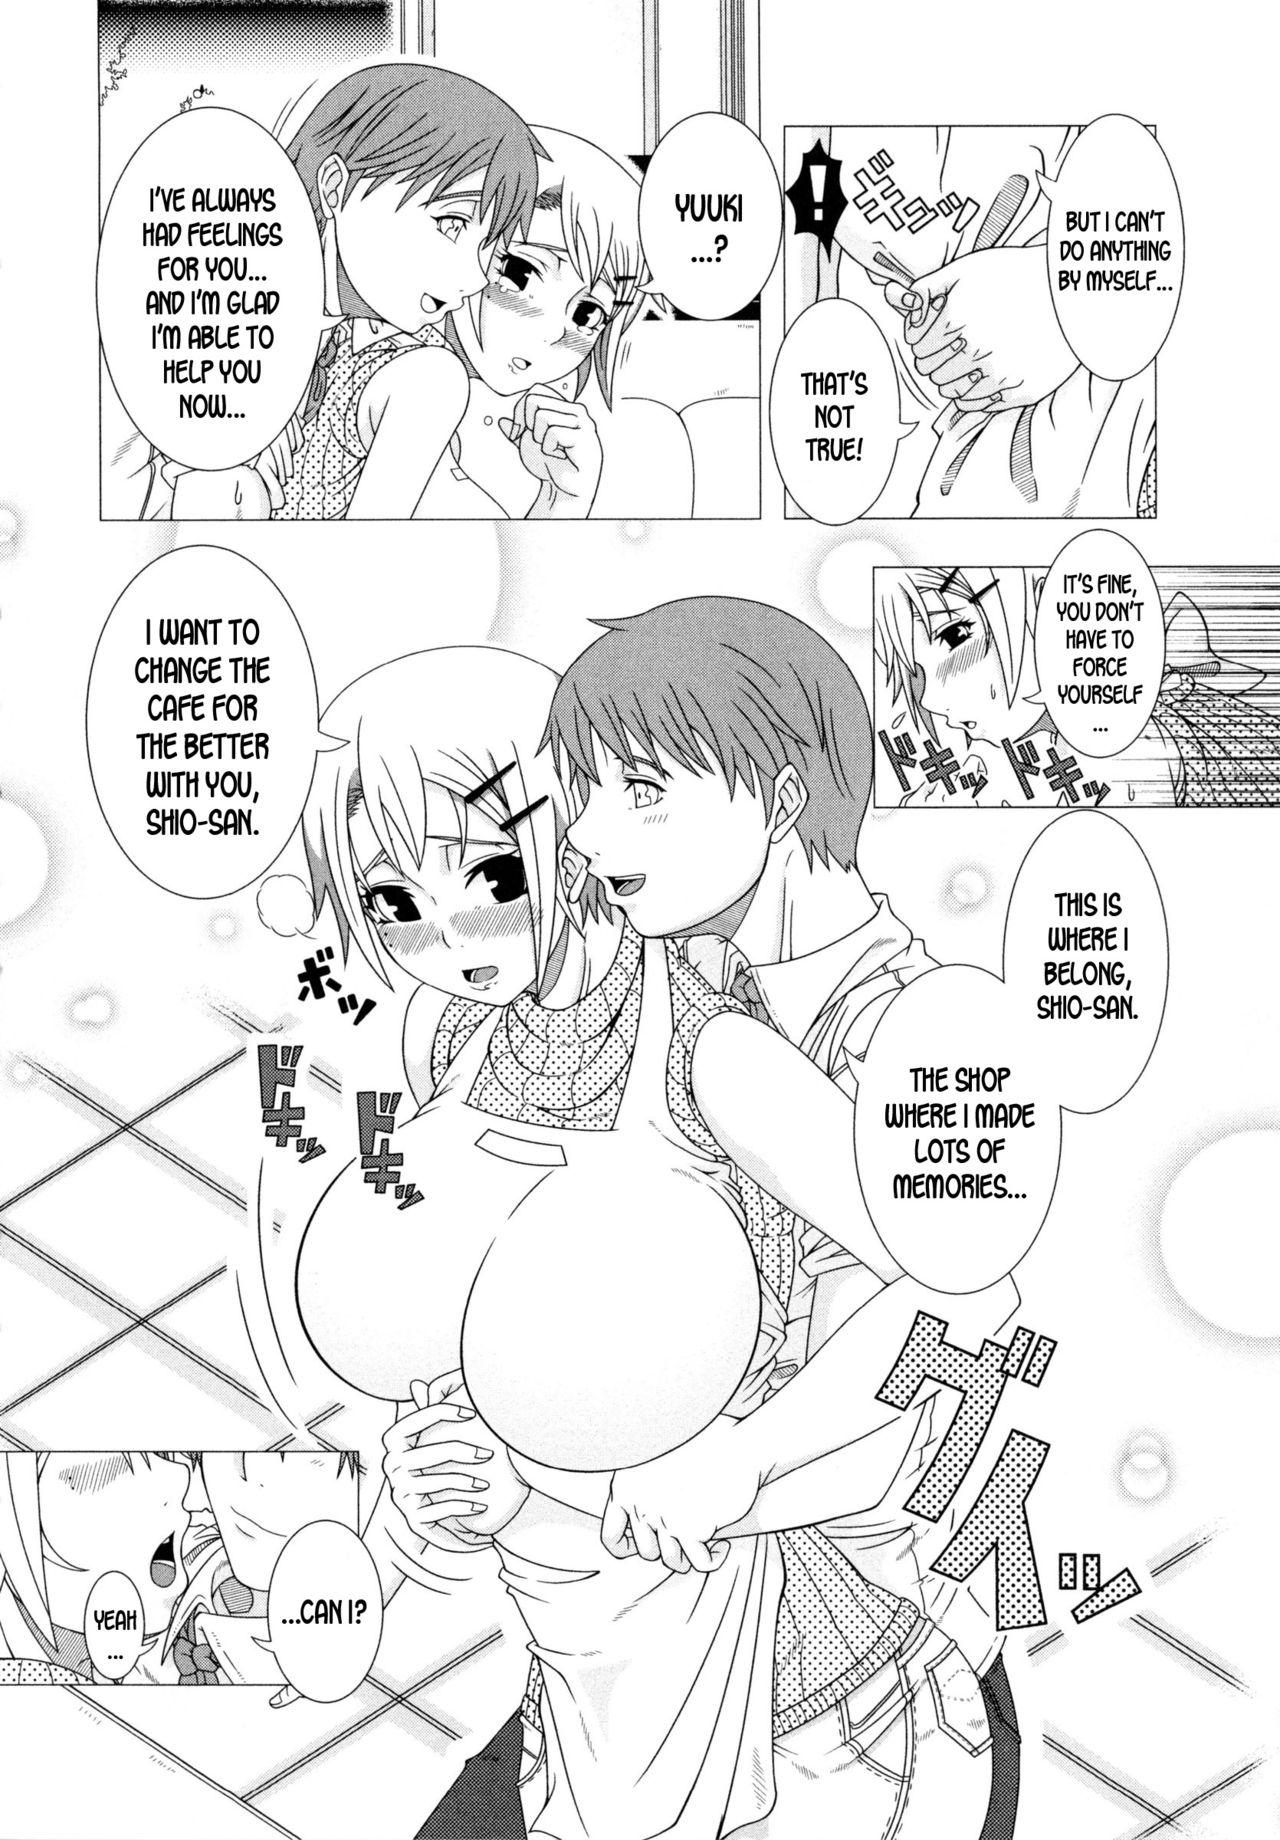 Mas Futari no Jikan | Our Time Together Yanks Featured - Page 8